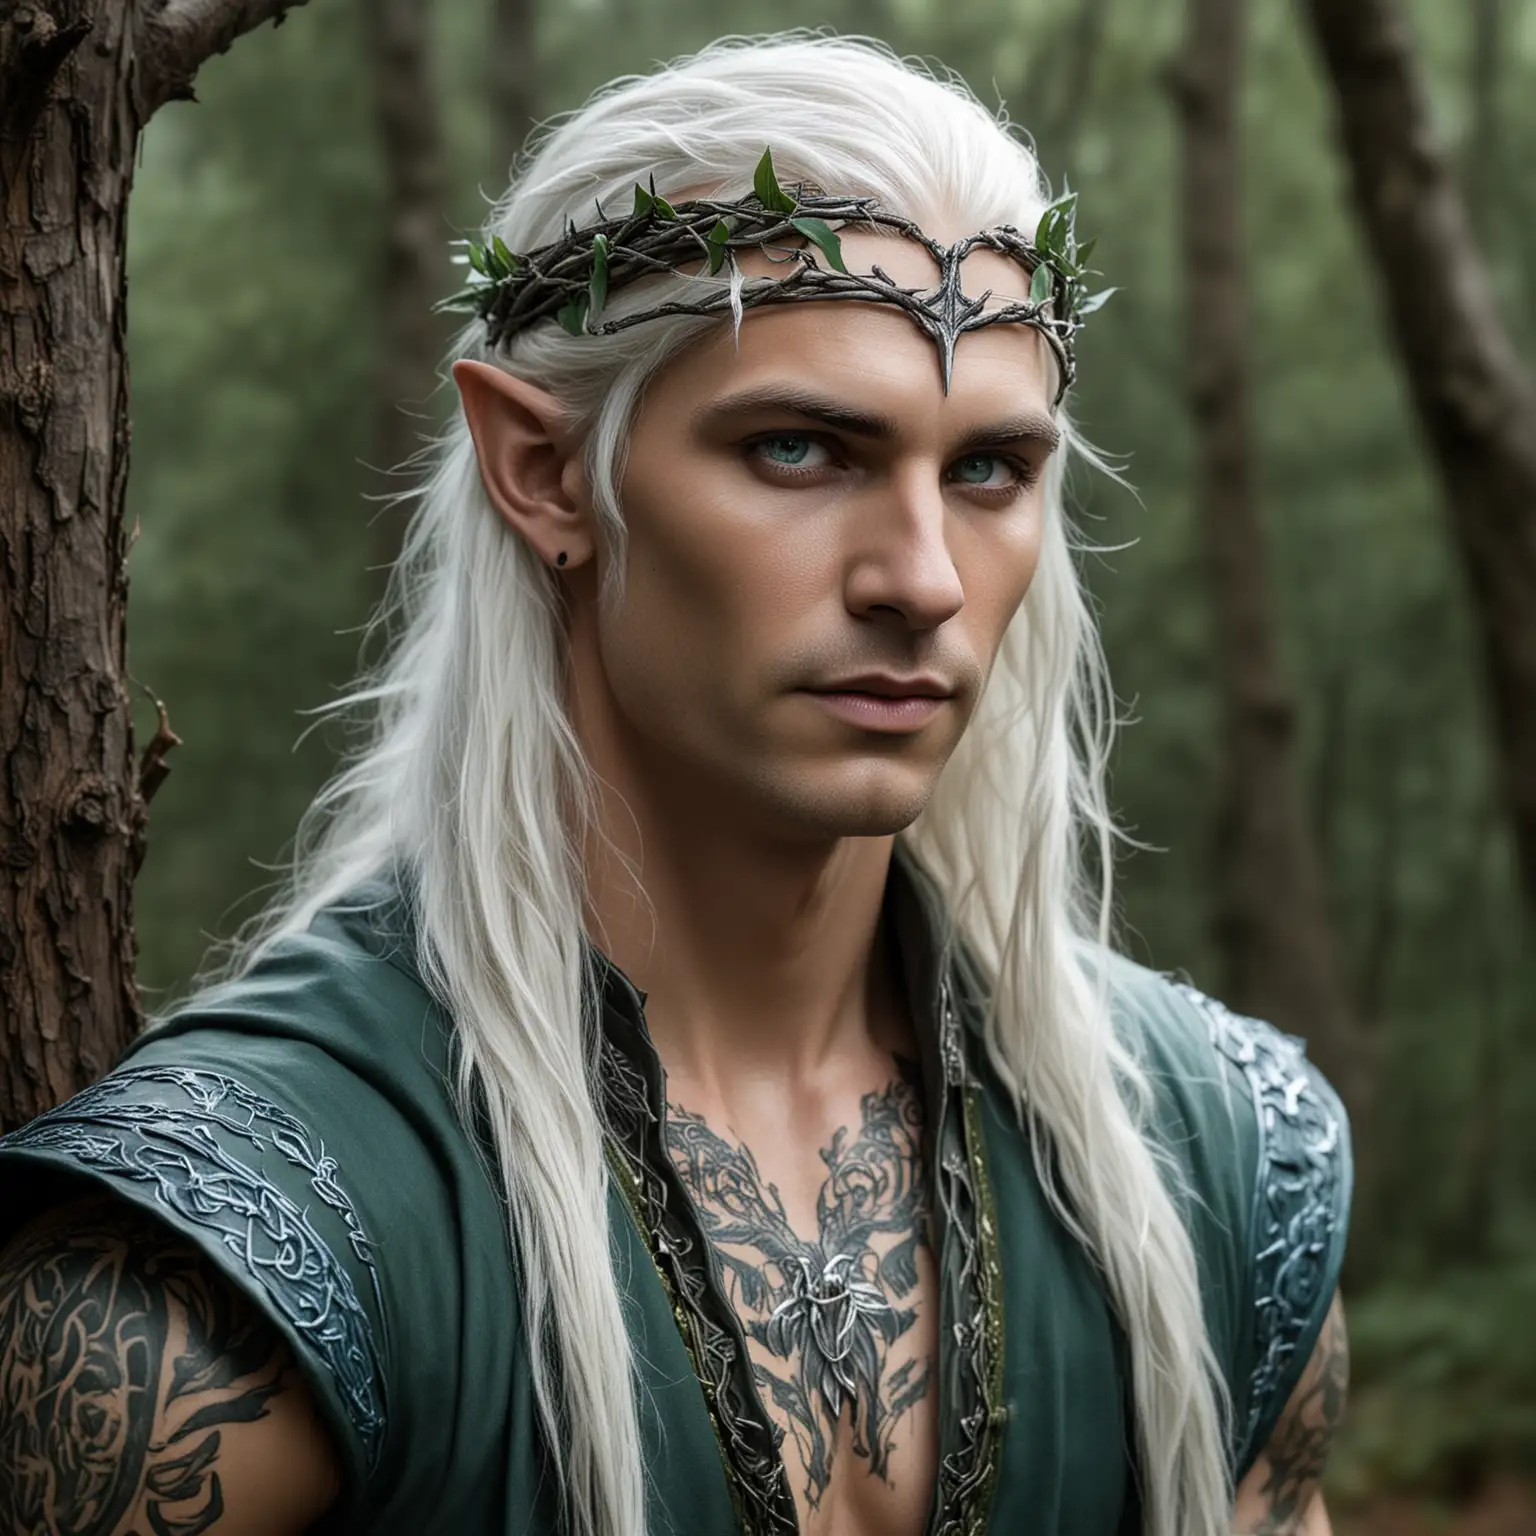 Handsome Male Elf Druid with Elven Tattoos in Woodland Setting